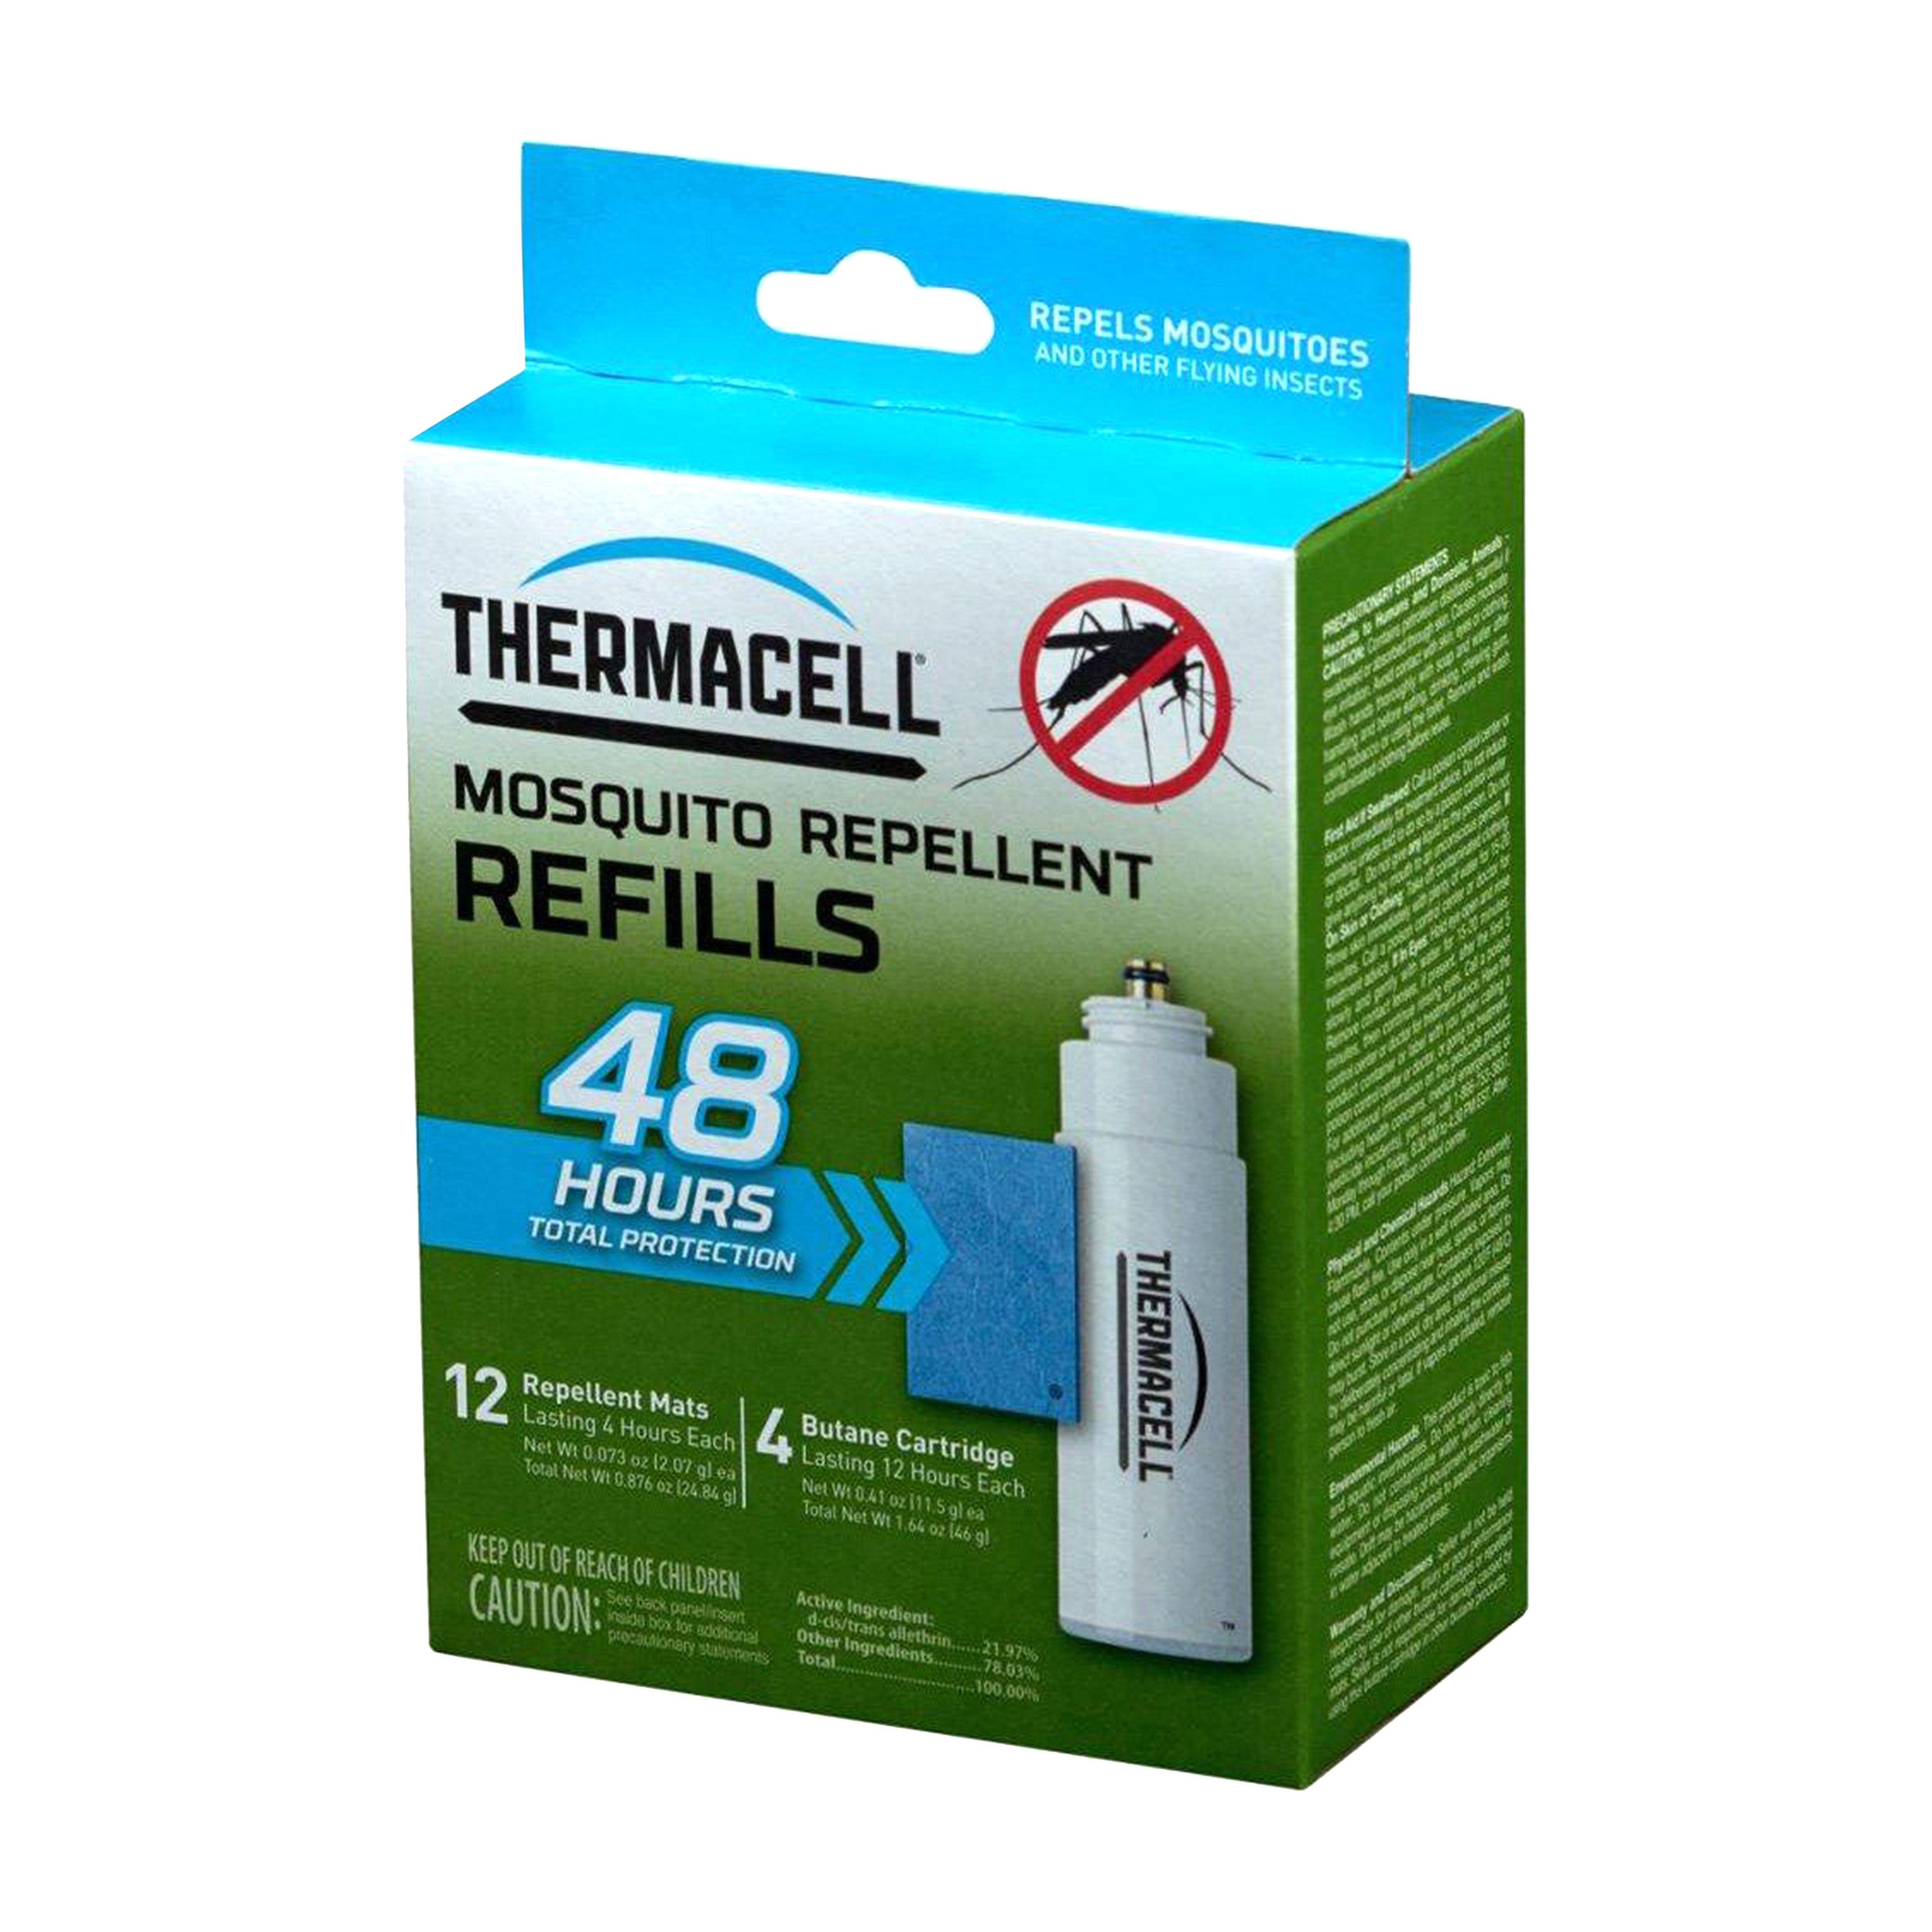 Themacell Original Mosquito Repeller Refill (Value Pack) Review